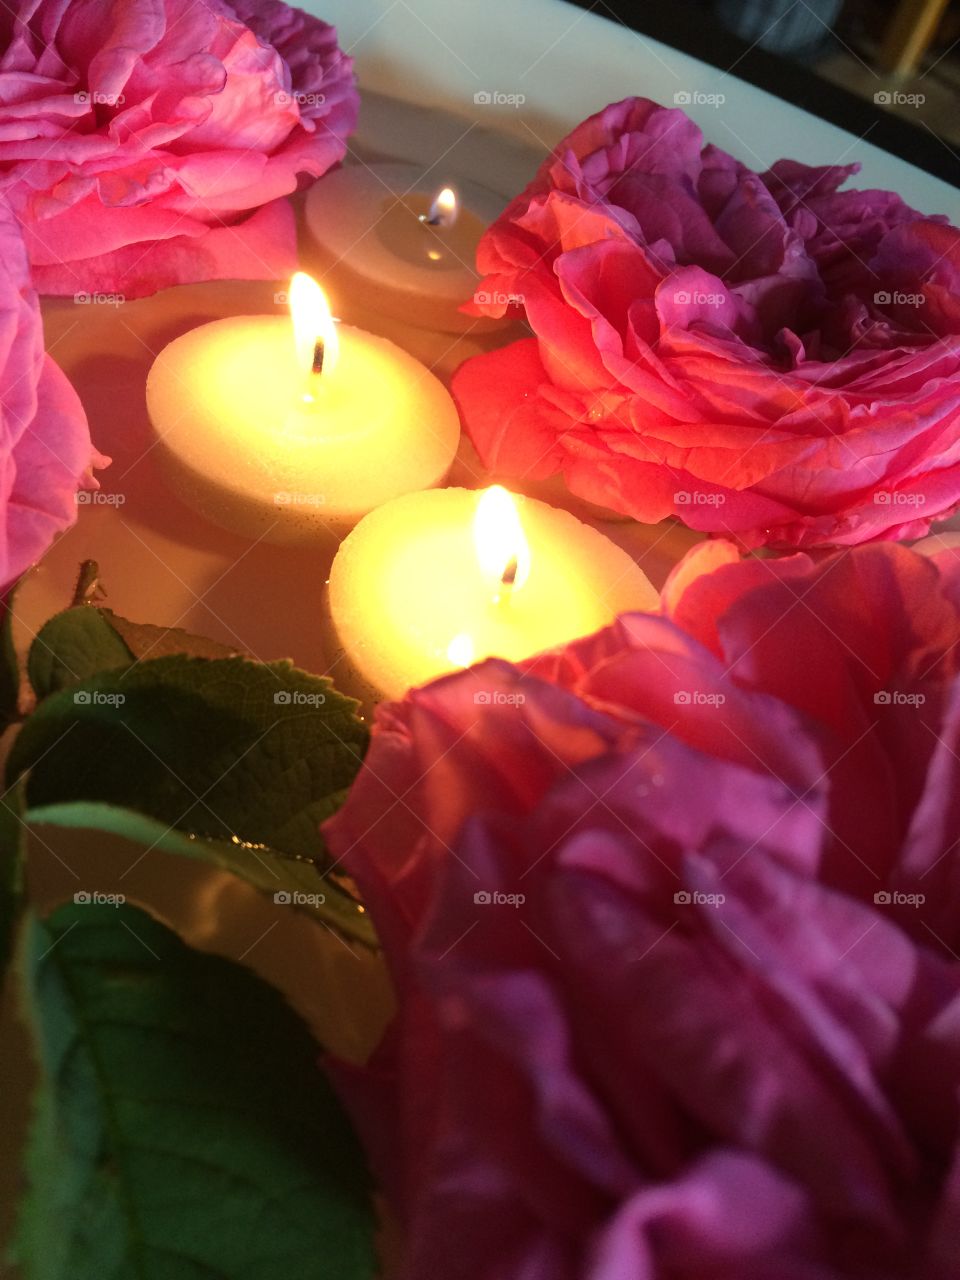 Wild rose ambience. Rose and tea lights 